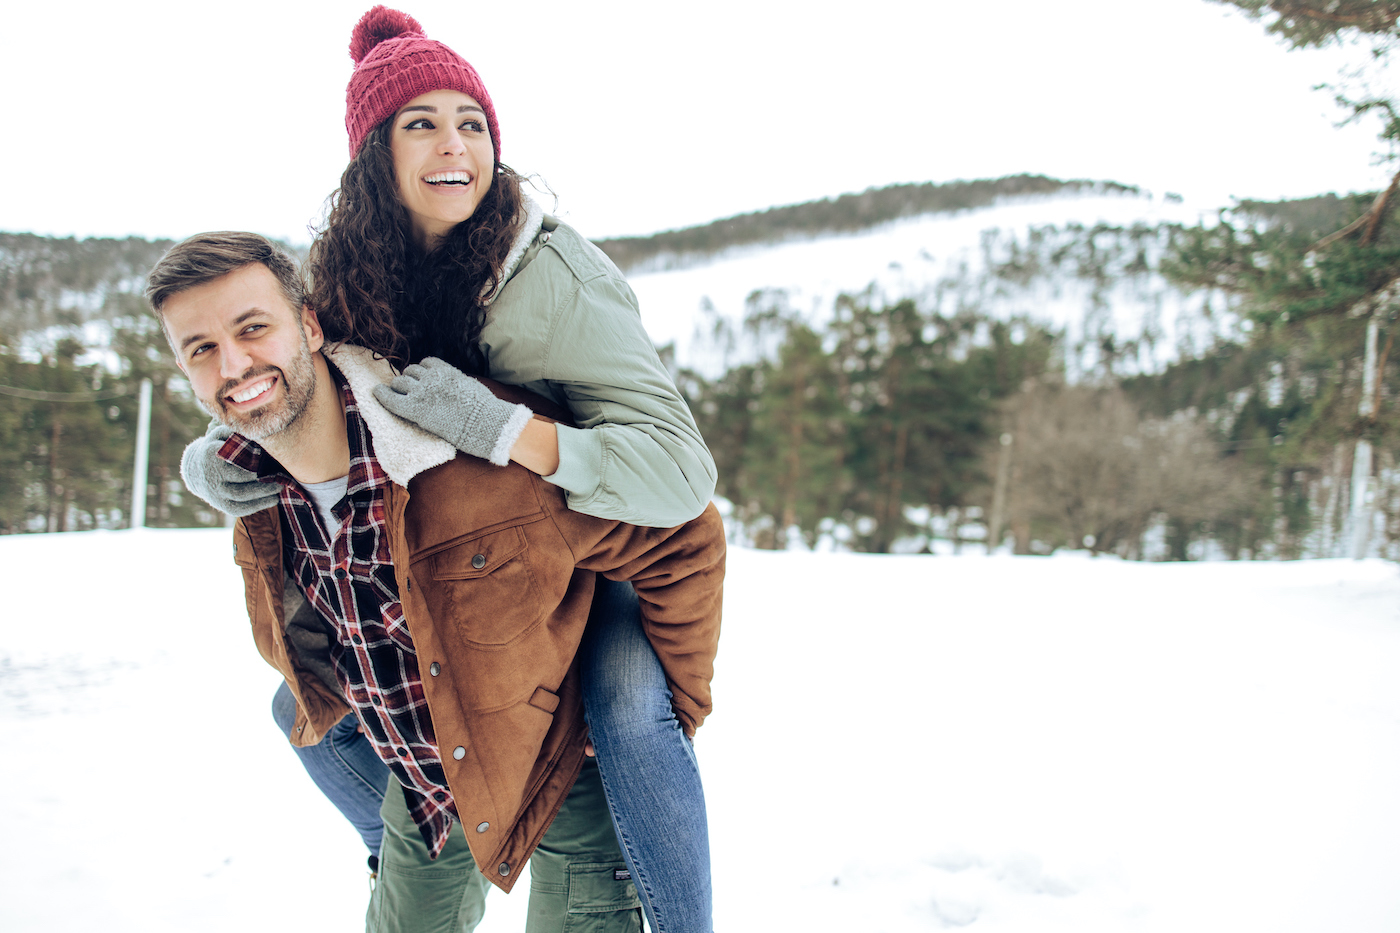 Man carrying his wife on shoulders and enjoying winter together